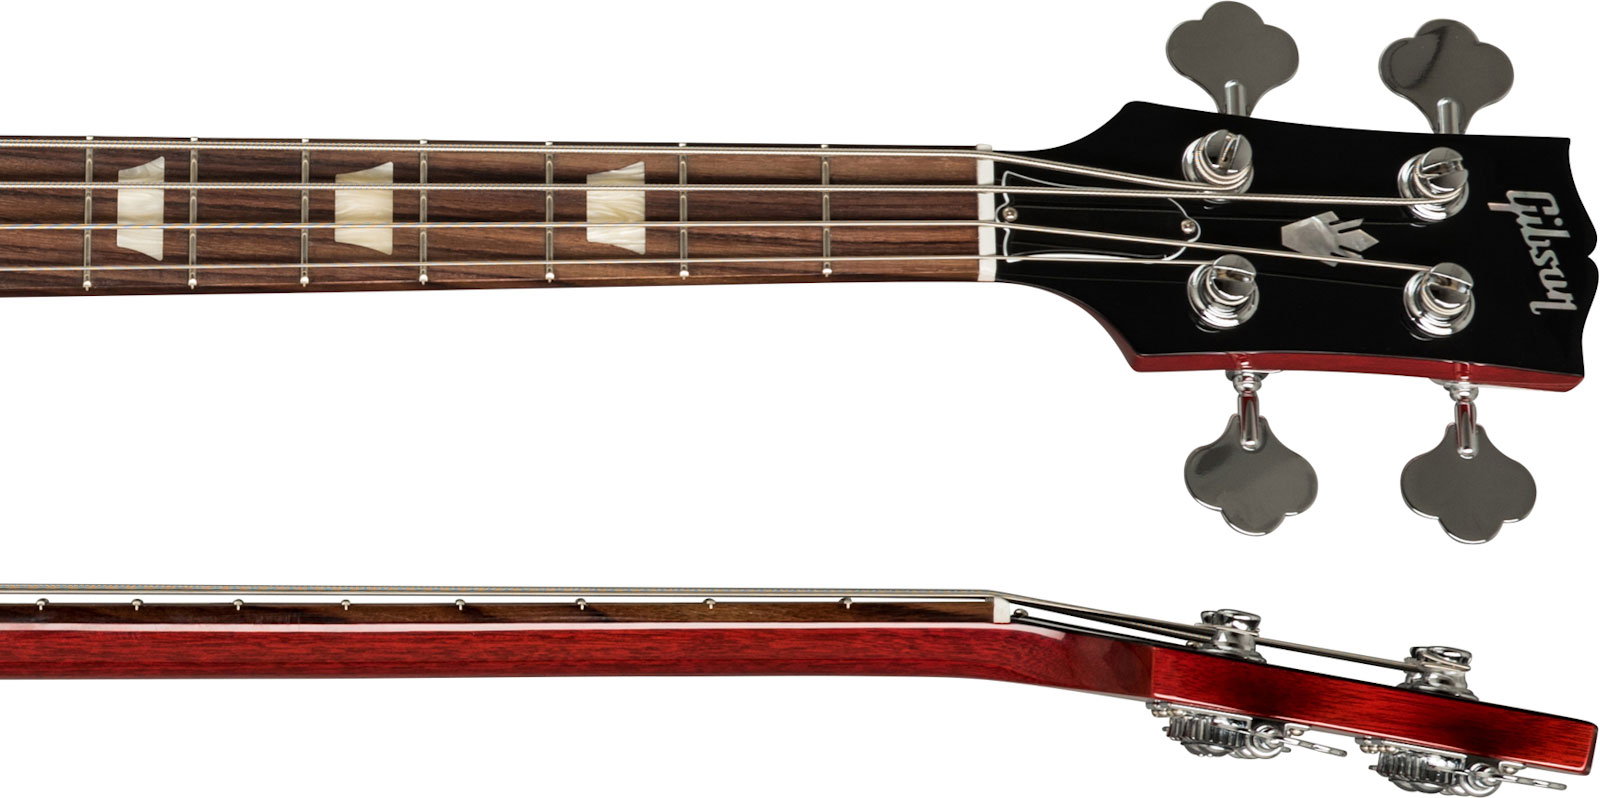 Gibson Sg Standard Bass Original Short Scale Rw - Heritage Cherry - Basse Électrique Solid Body - Variation 3